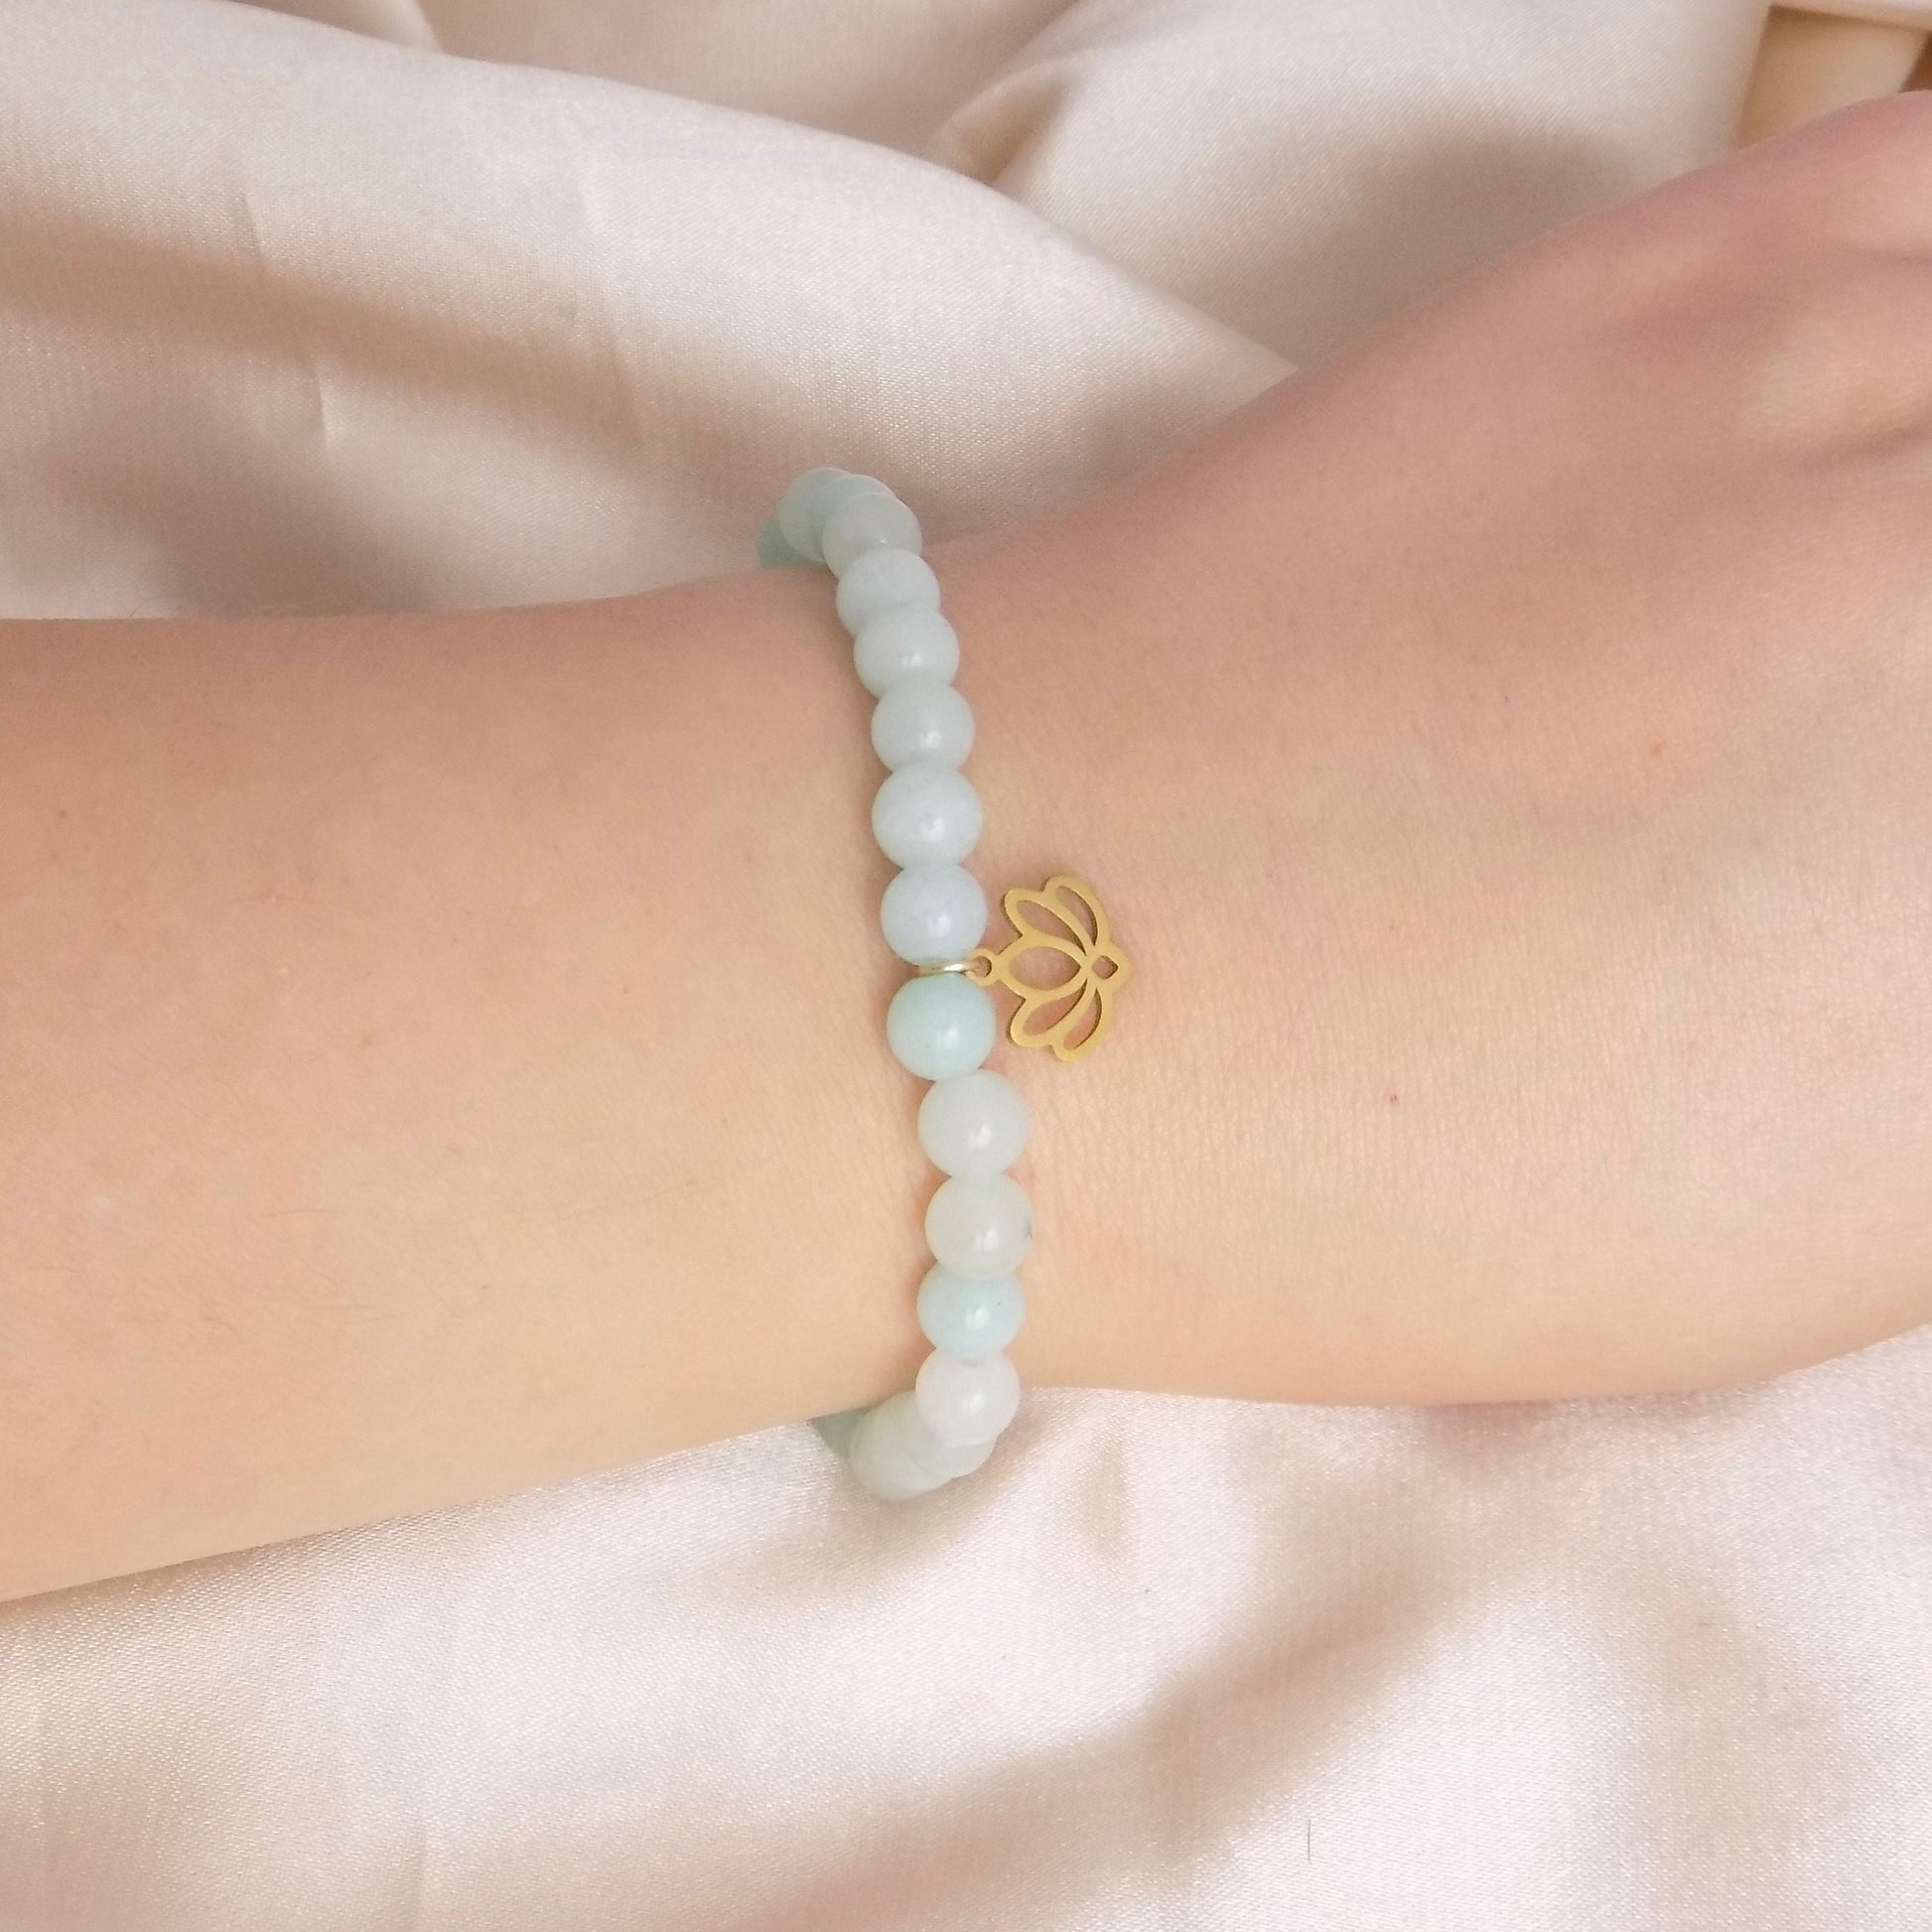 Light Green Jade Bracelet with Lotus Charm, 18K Gold Stainless Steel, Delicate Layer, Simple Everyday, M7-317